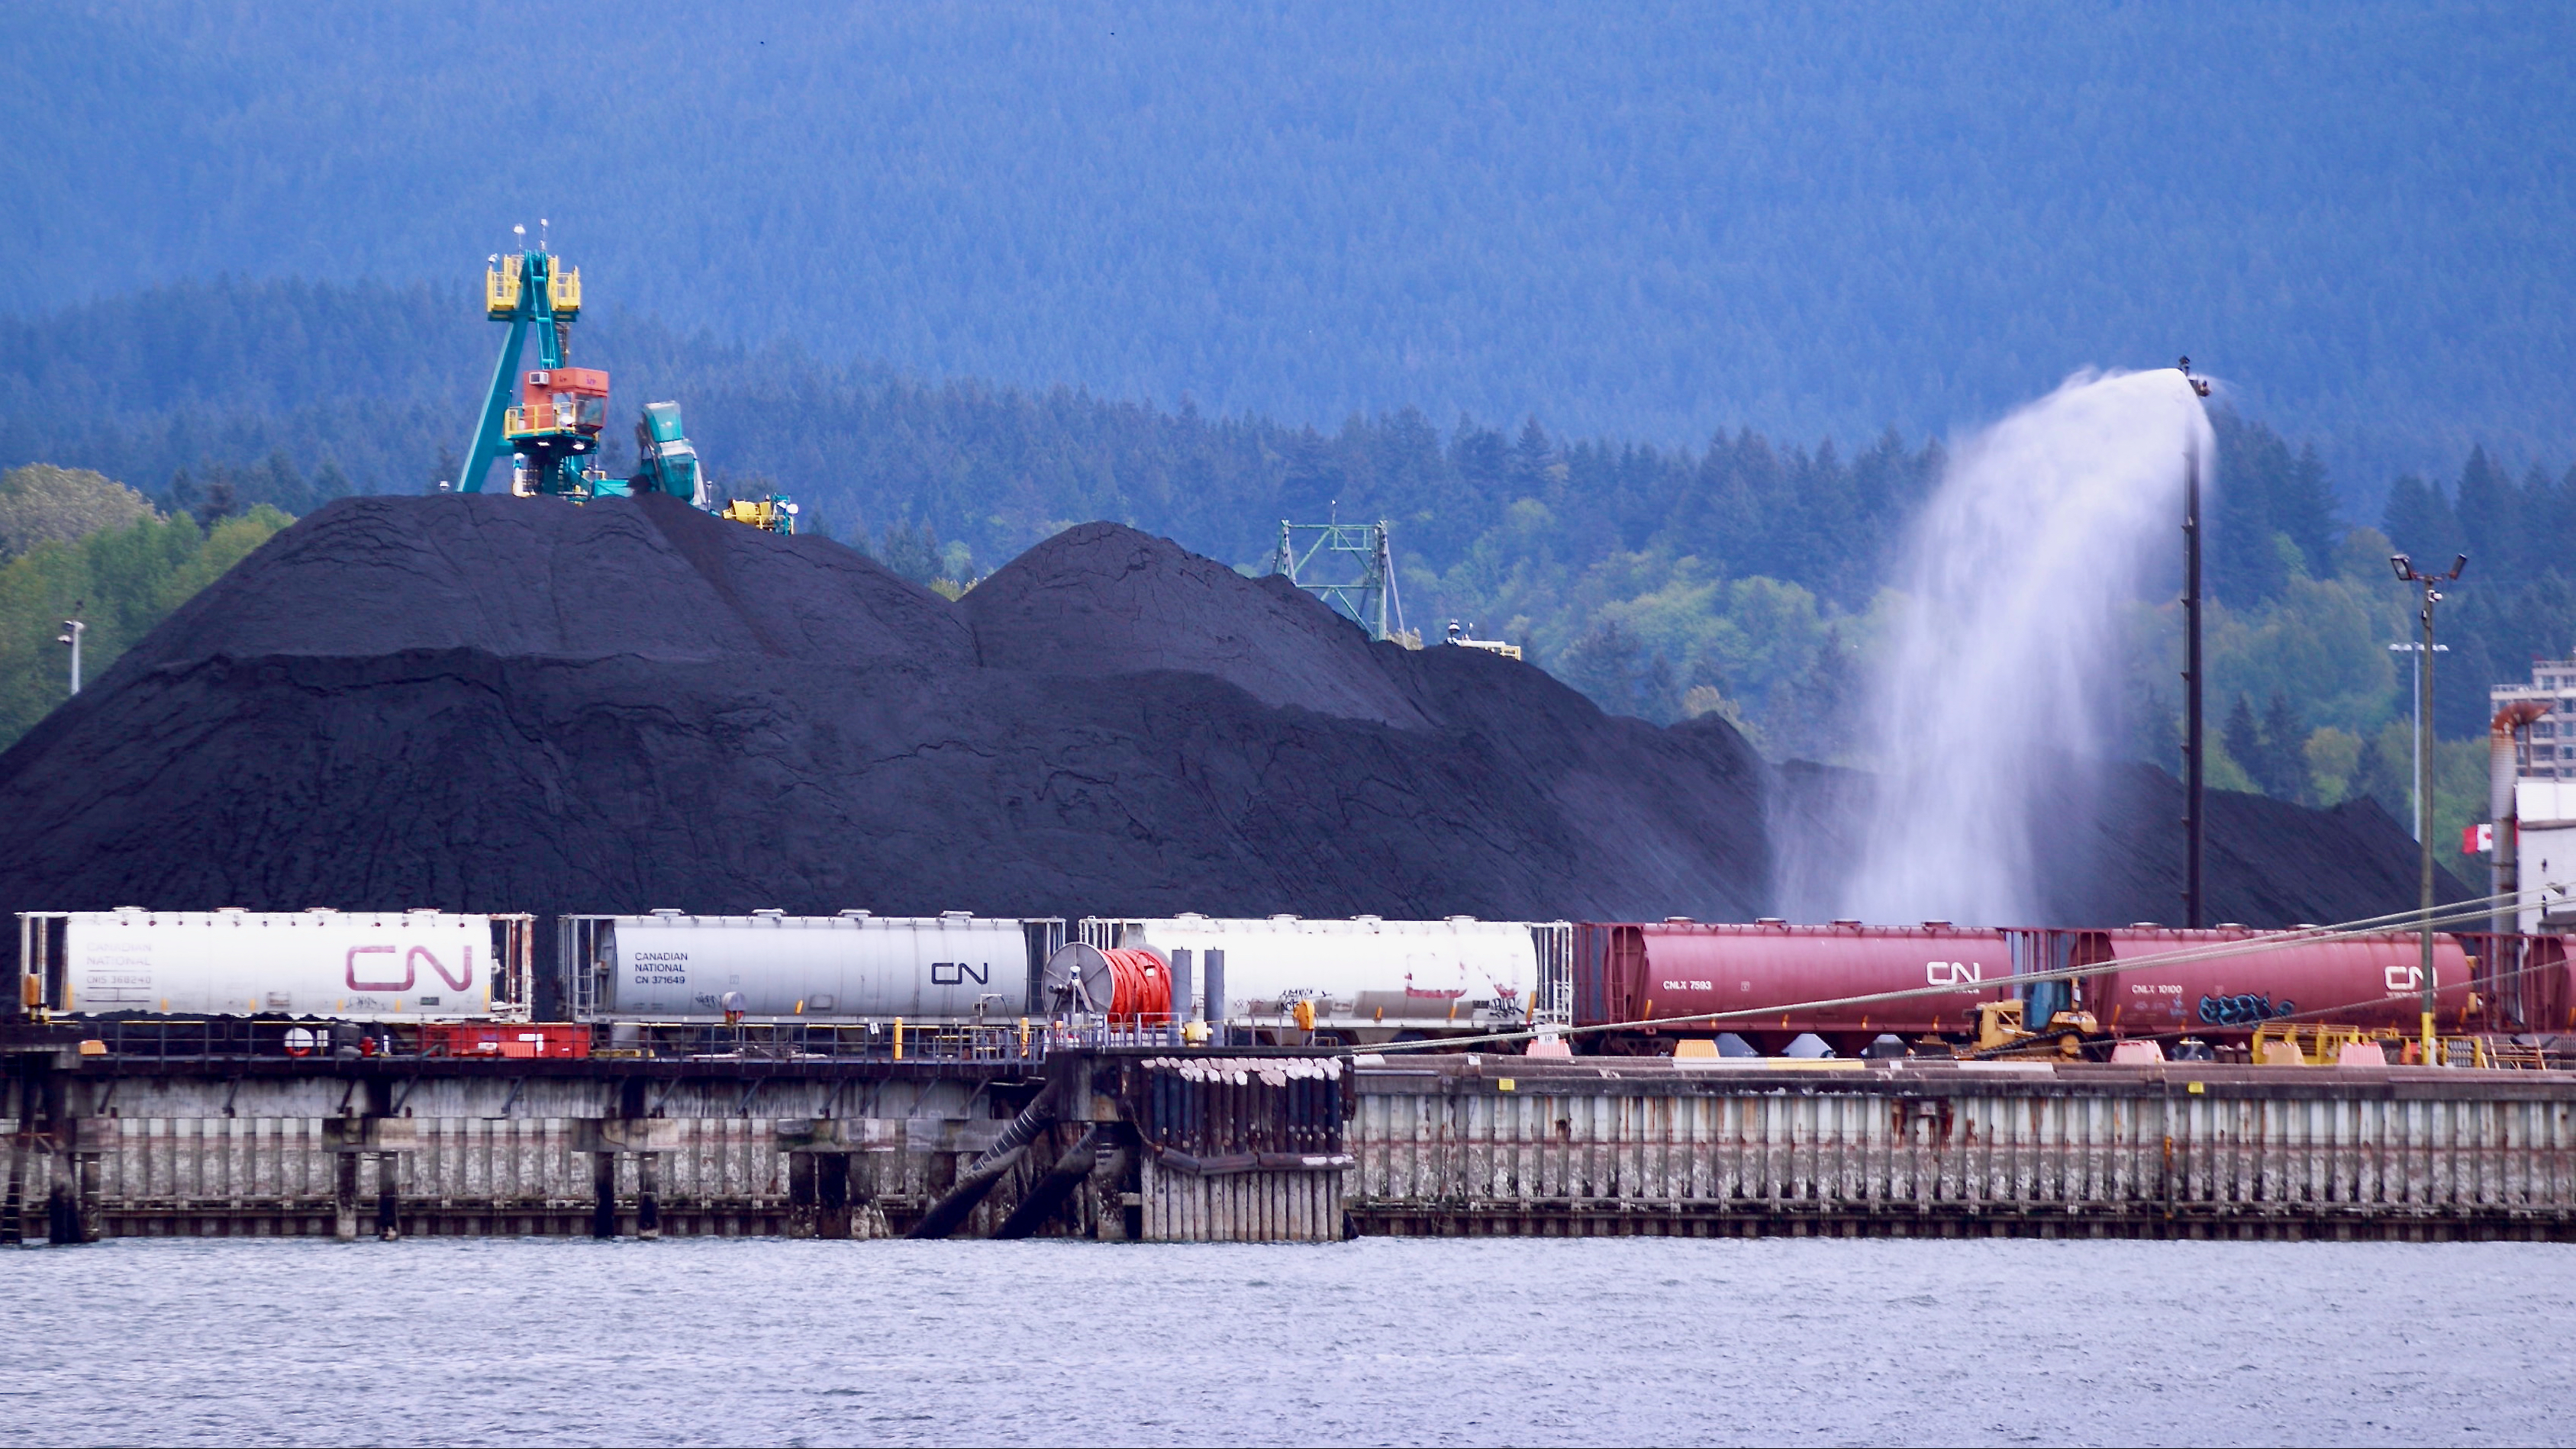 CN trains at the Port of Vancouver Neptune terminal with coal in the background.